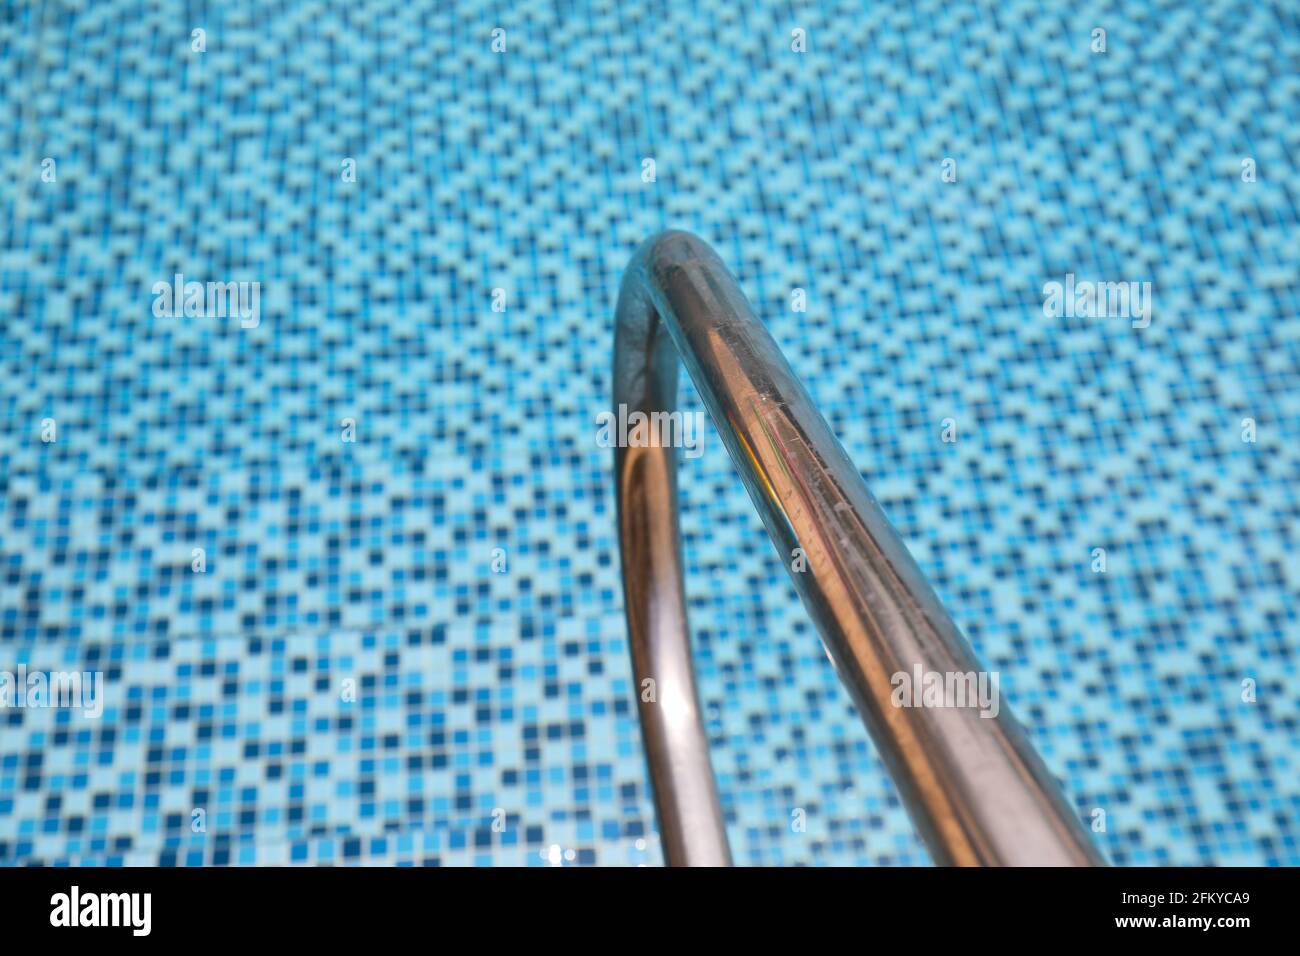 Grab bars ladder in a blue swimming pool. Stock Photo